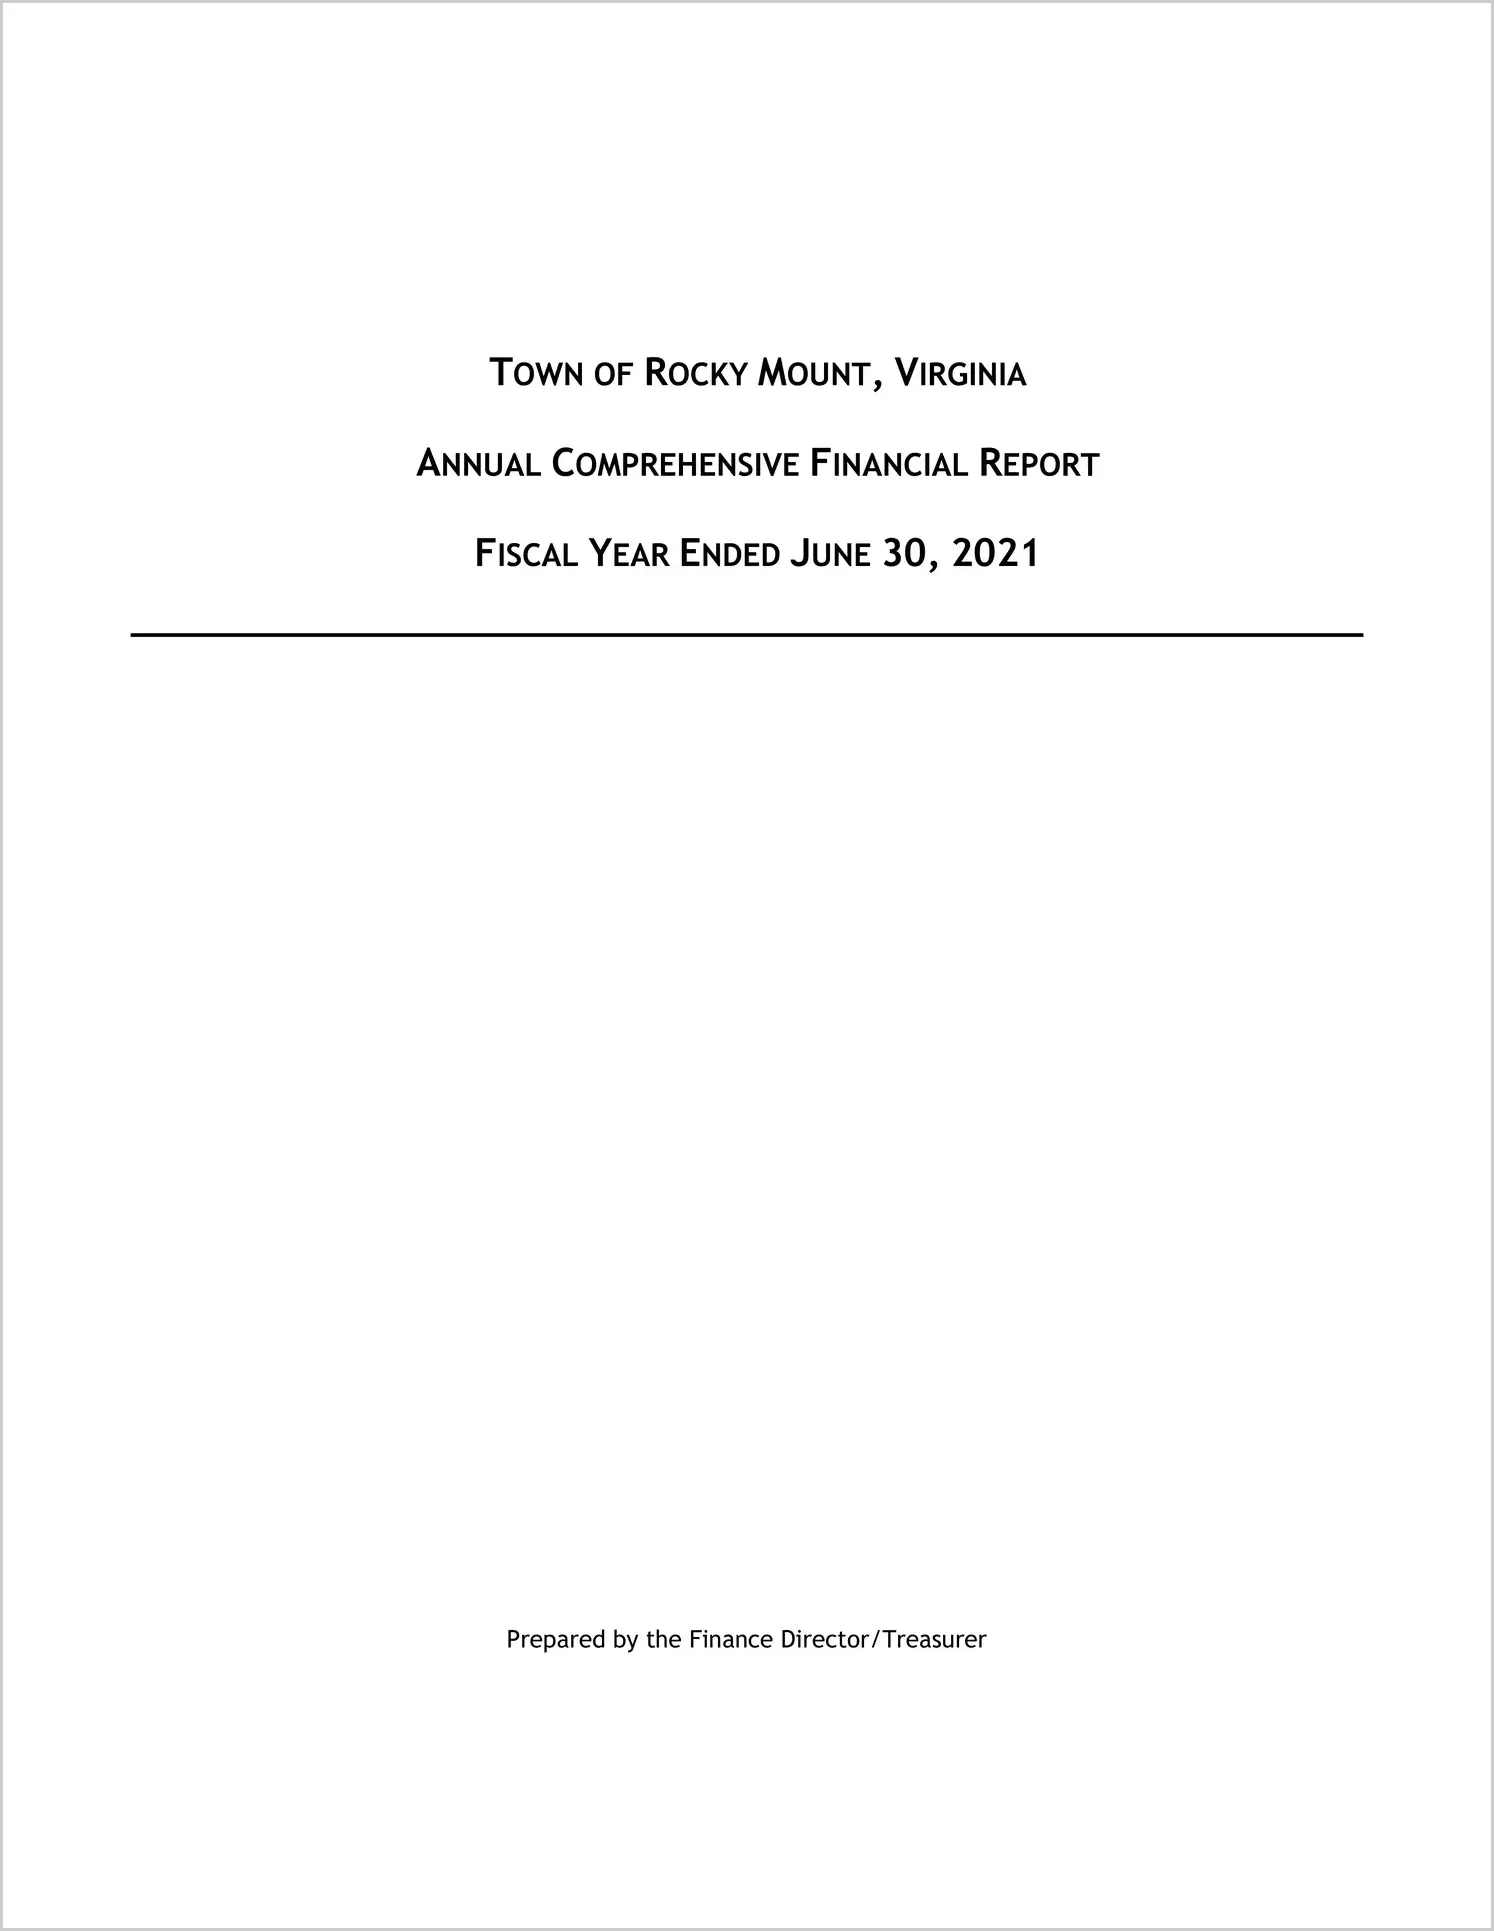 2021 Annual Financial Report for Town of Rocky Mount